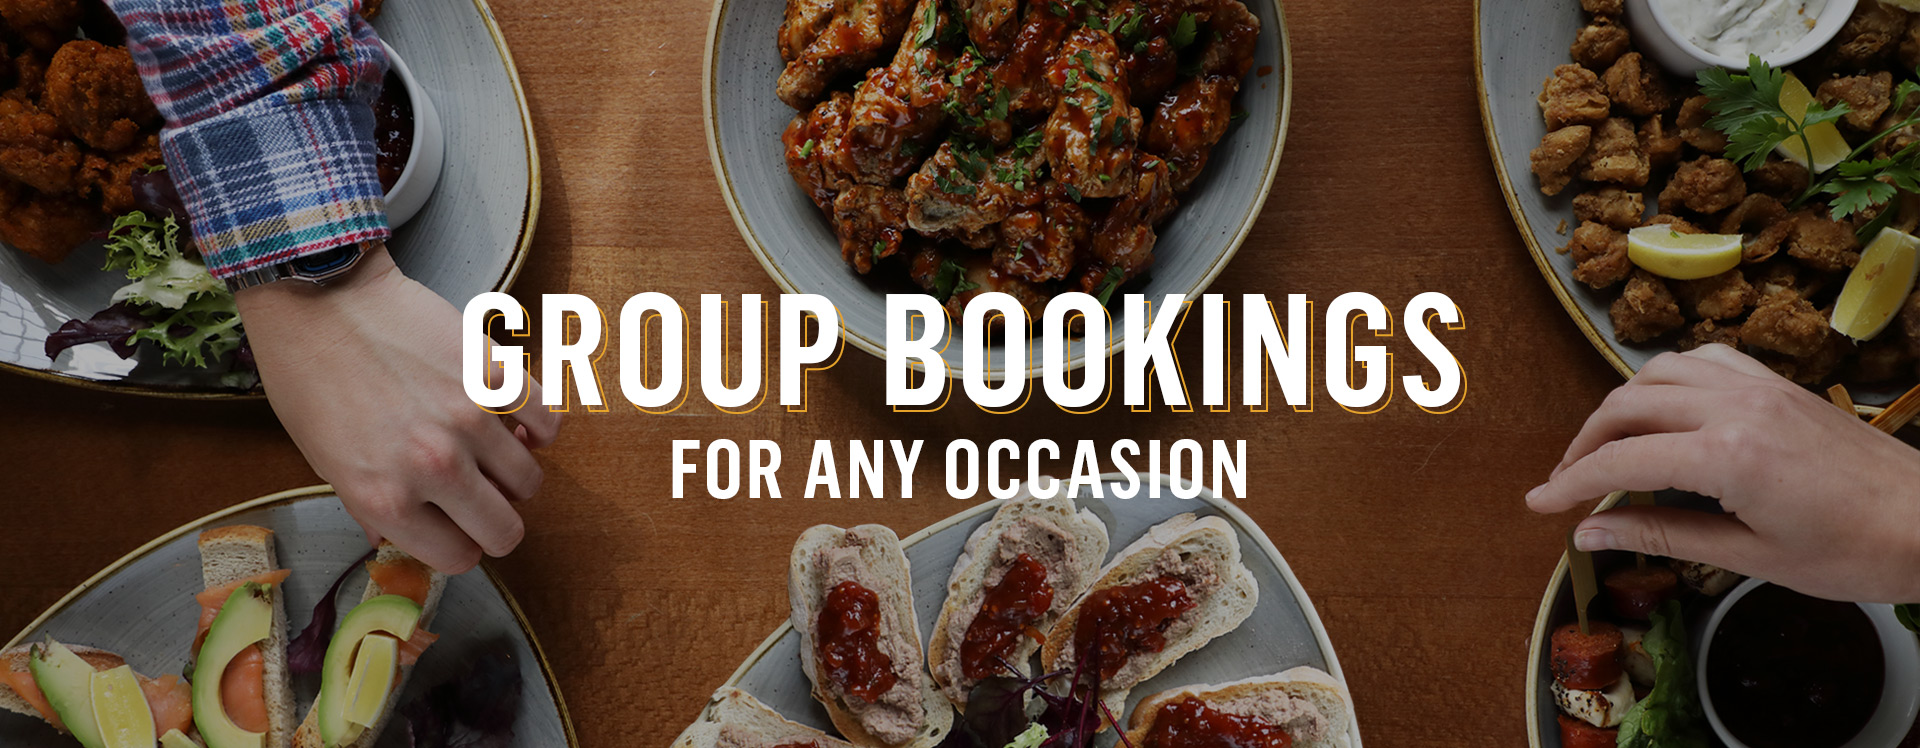 Group Bookings at The Conan Doyle